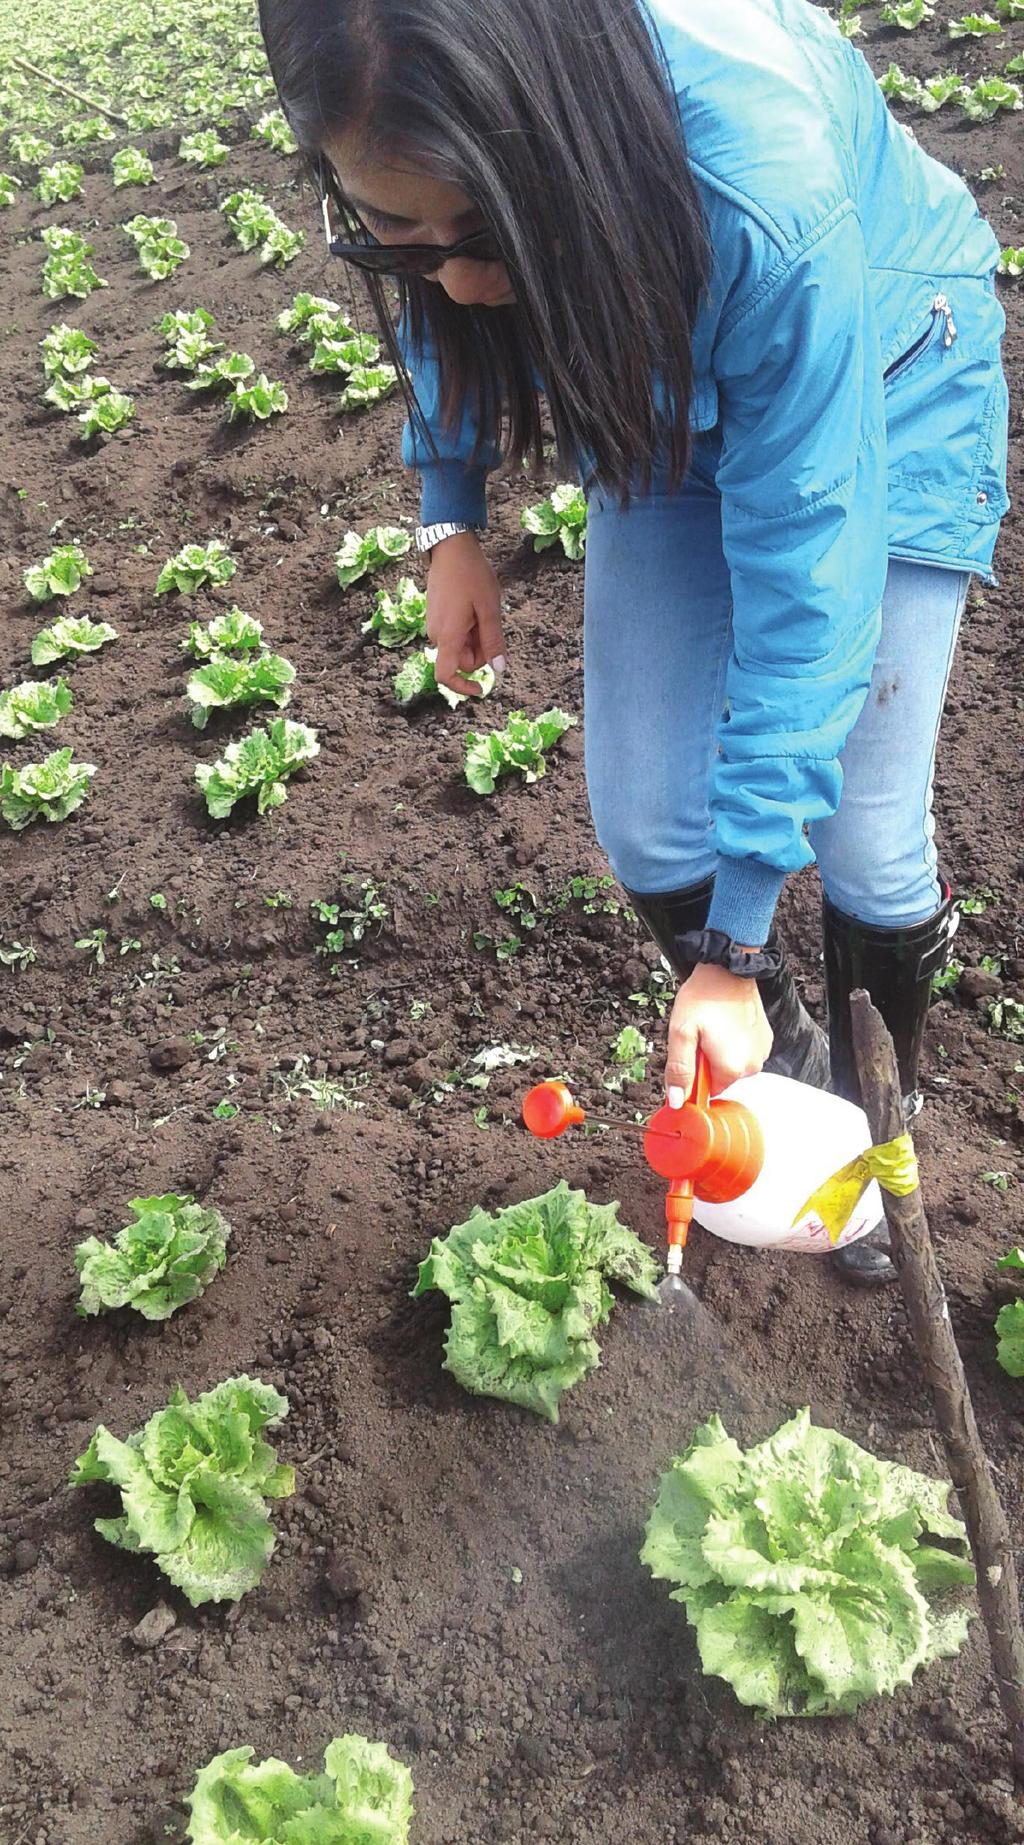 V i t a z y m e F i e l d Te s t s f o r 2 0 1 8 Lettuce with Vitazyme application [ Vitazyme is called Globaplant in Colombia.] Researcher: Diana Urrea Ramirez Research organization: Ag